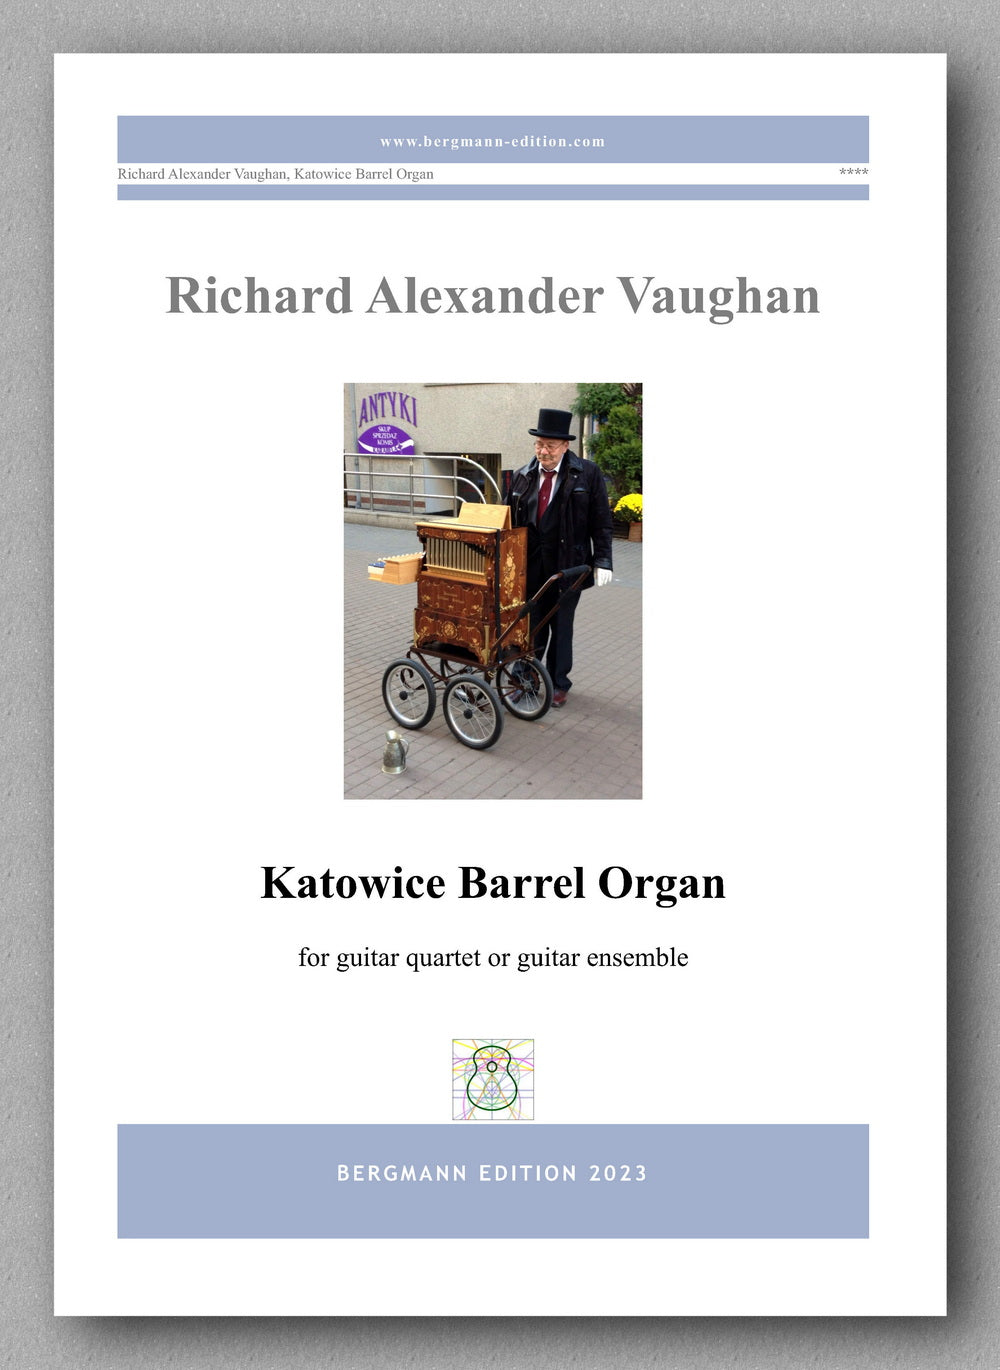 Katowice Barrel Organ by Richard Vaughan - preview of the cover